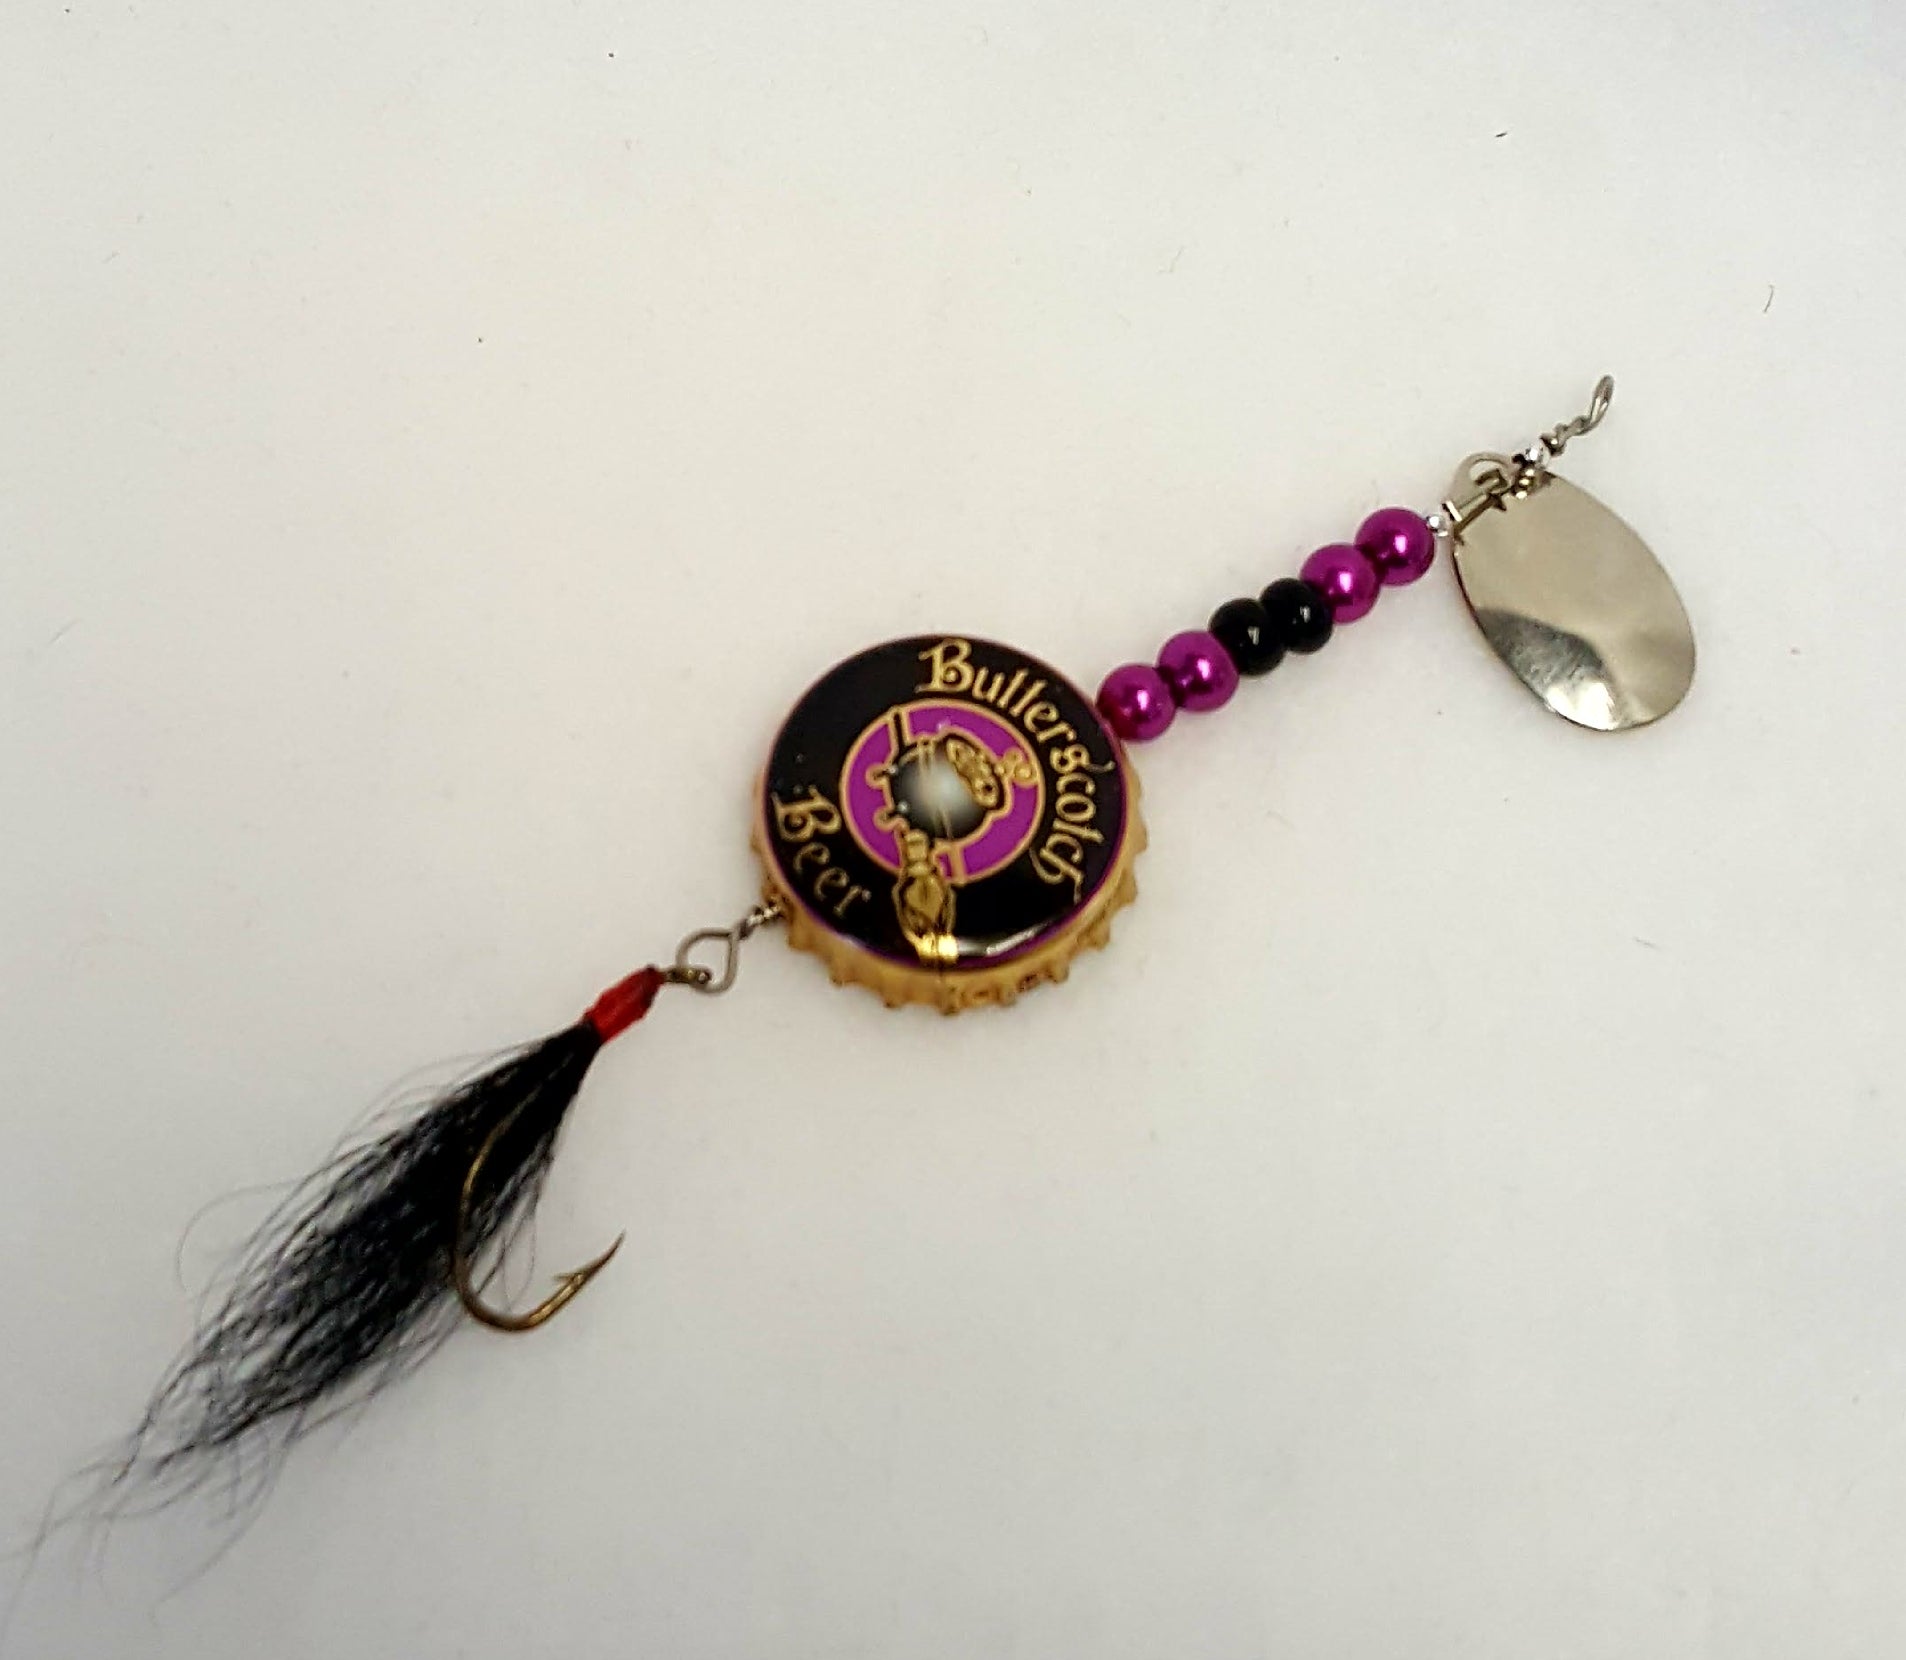 Lure has a black bottle cap with a cauldron, black & purple beads, and black fly.